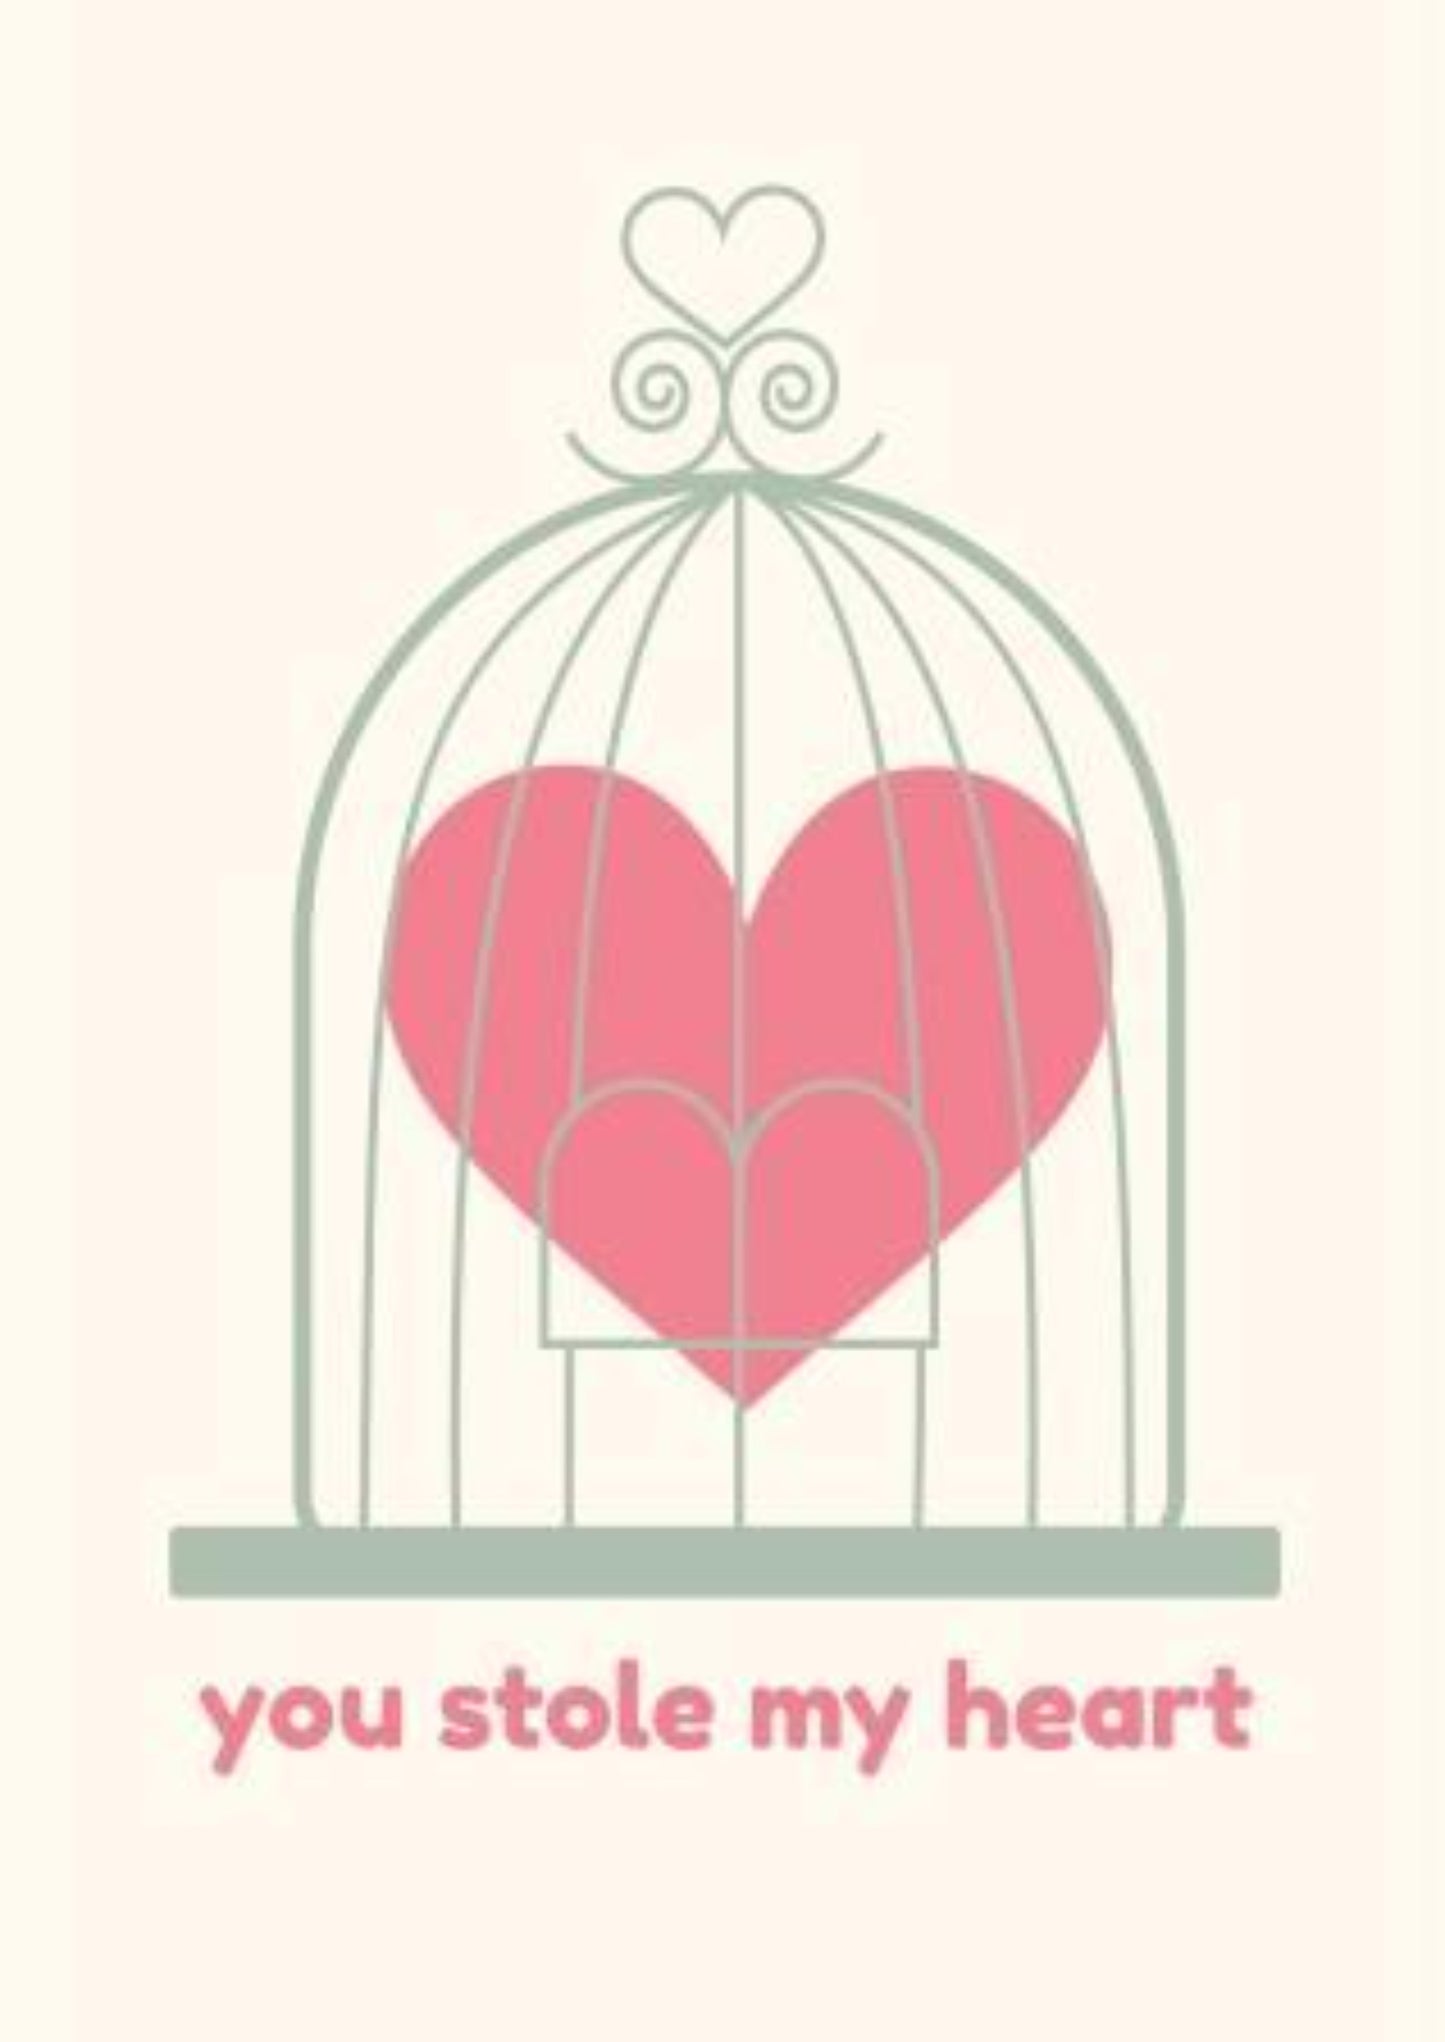 You stole my heart.